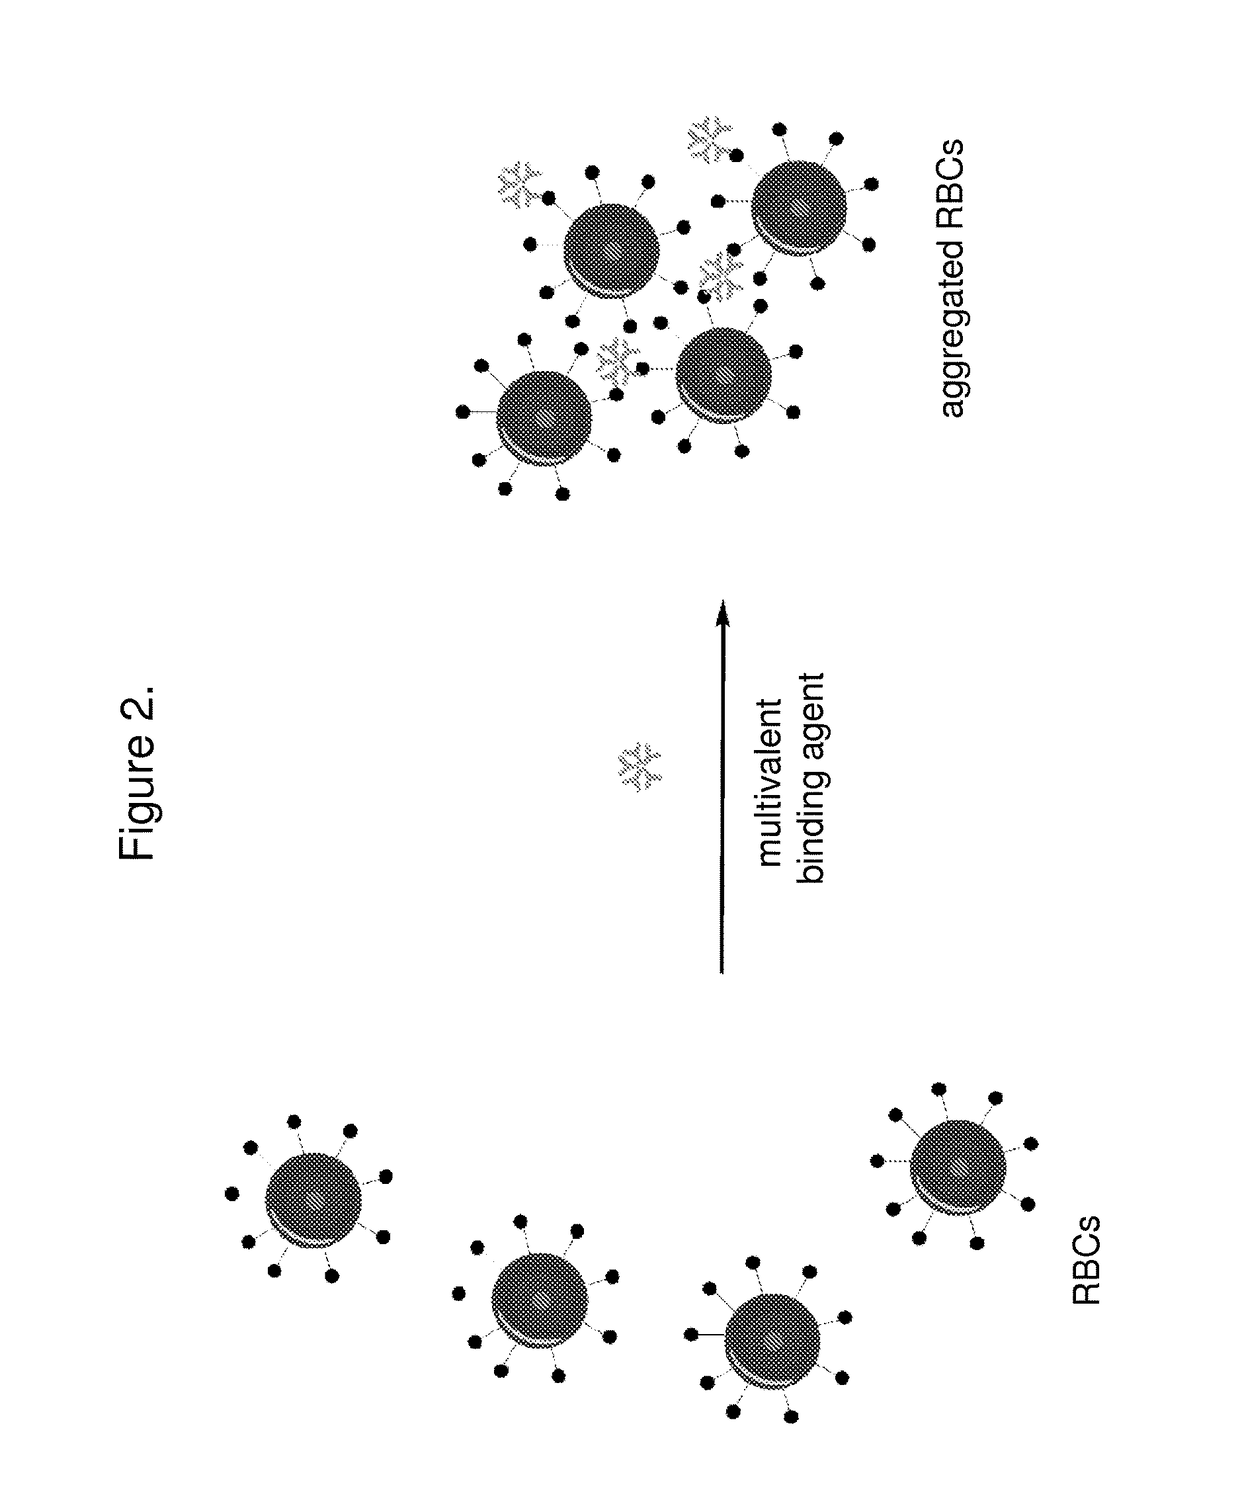 Methods for blood typing and antibody screening